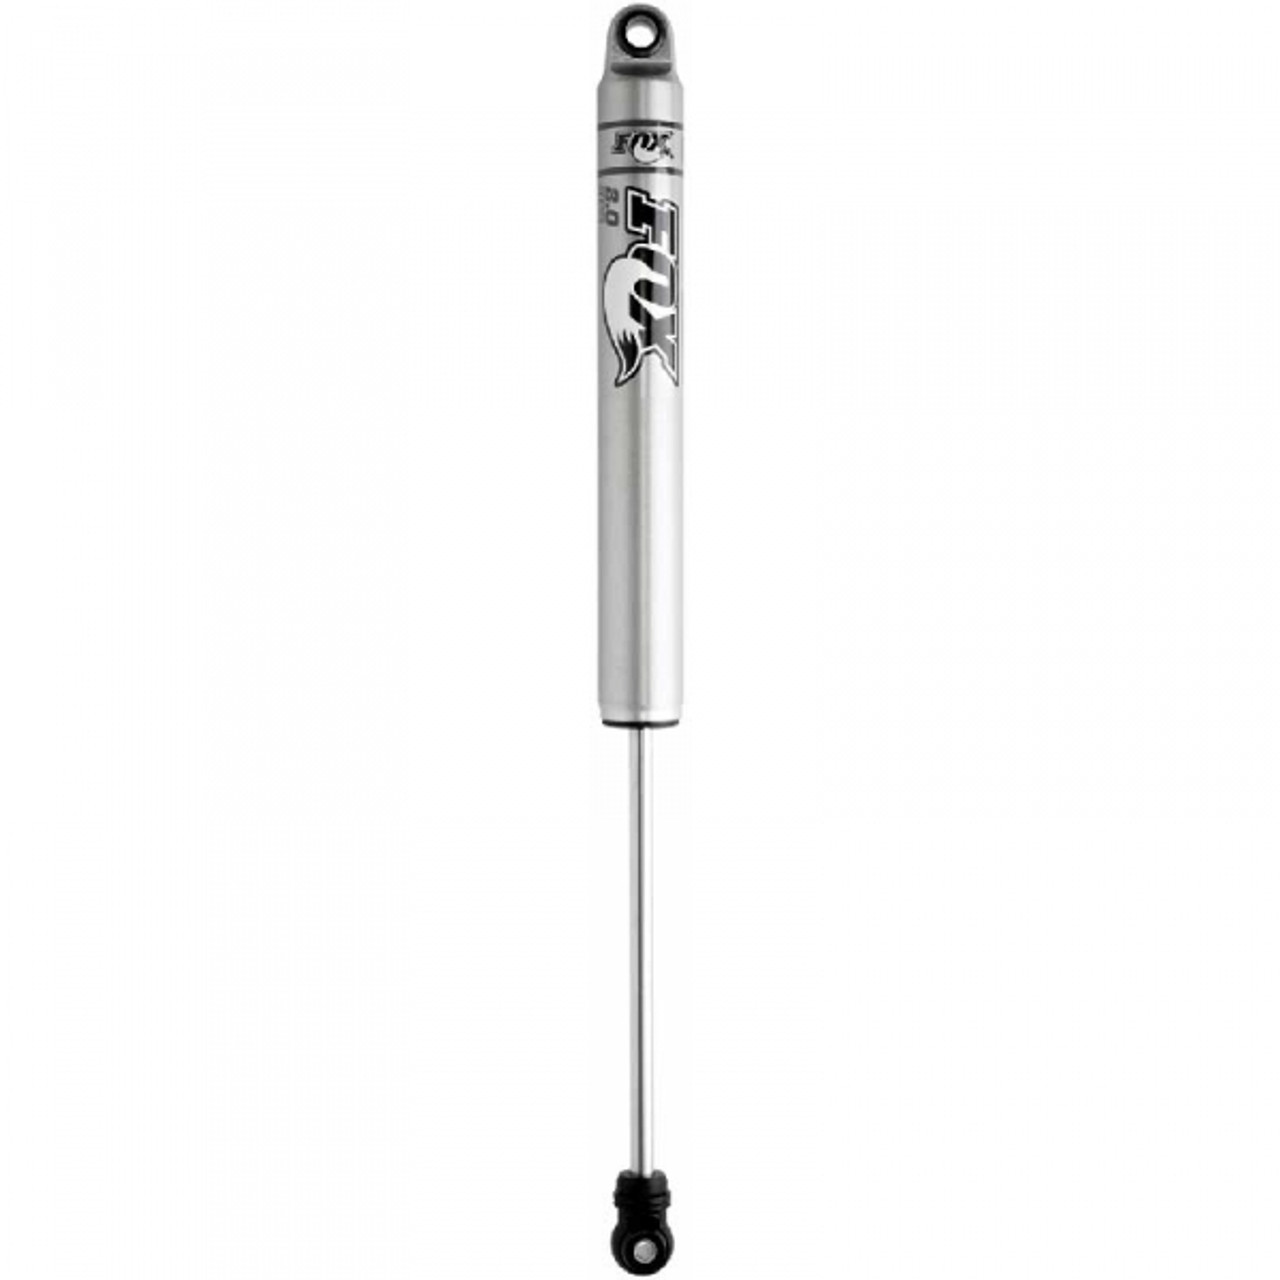 Fox 2.0 Performance Series IFP Shock Absorber 1999 to 2016 Ford F250/350 4WD (Rear) Lifted 0 to 1" (FOX980-24-647)-Main View